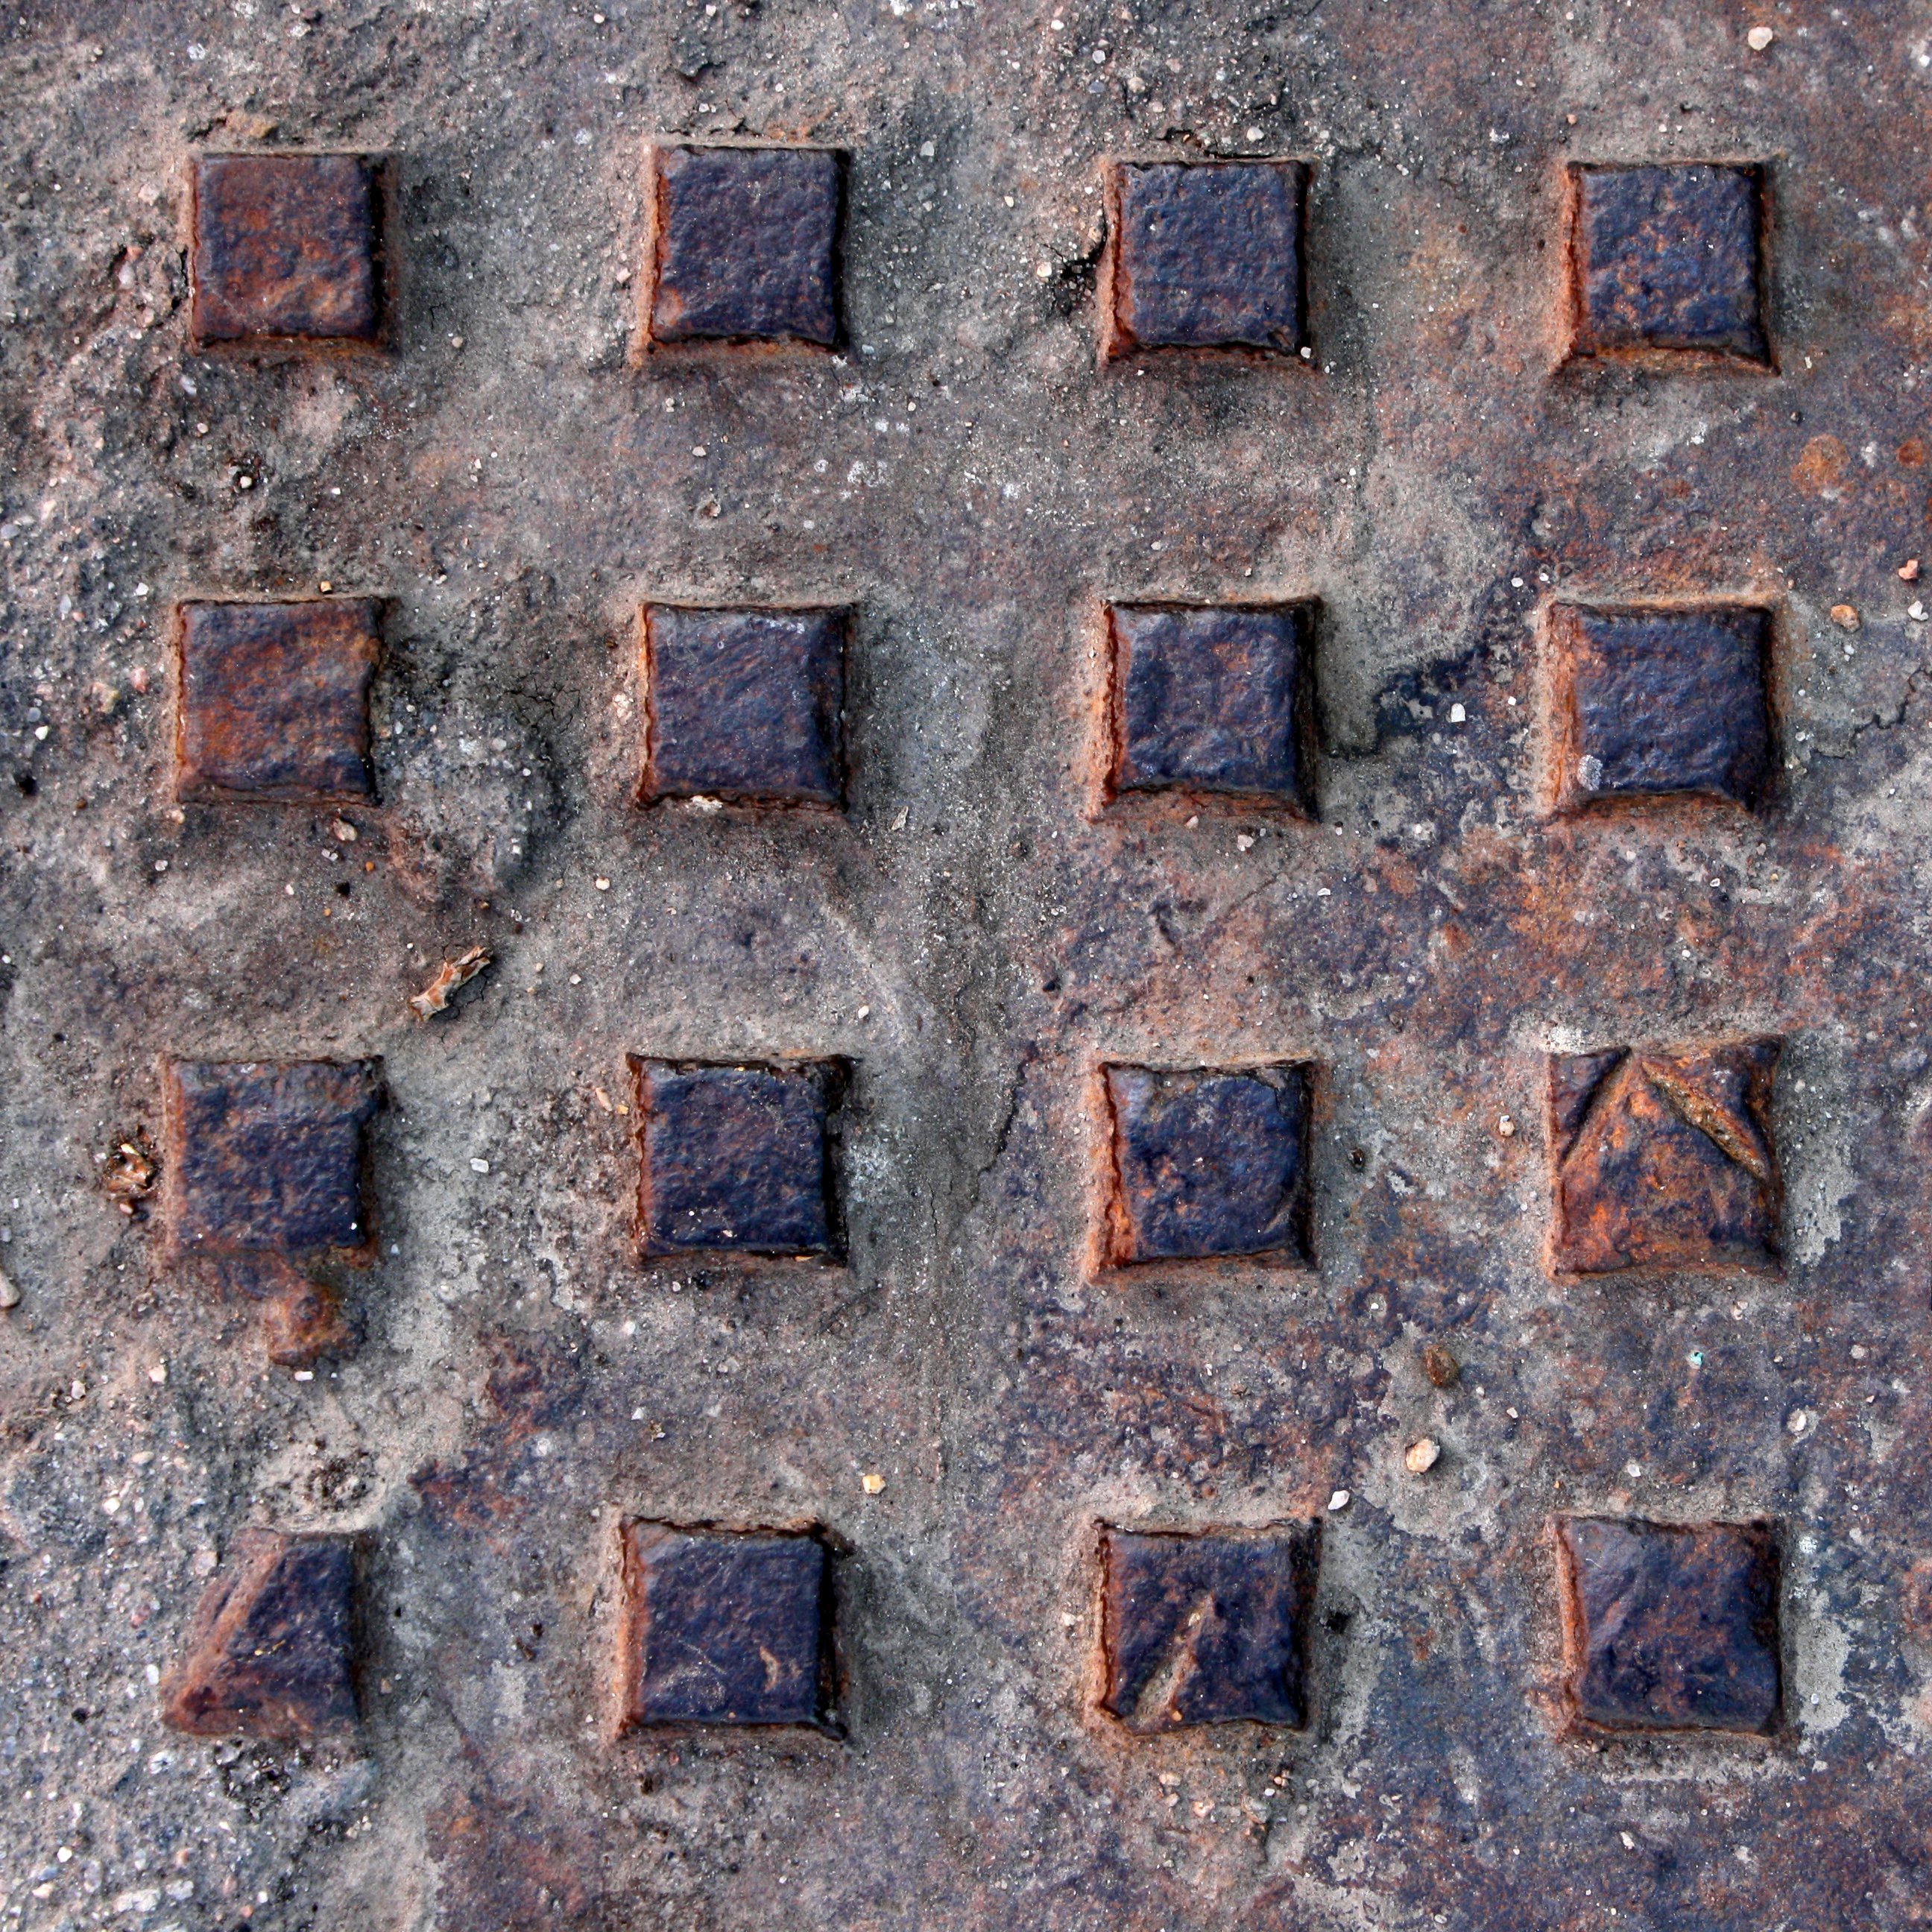 Rusted Metal Manhole Cover Texture Picture | Free Photograph ...